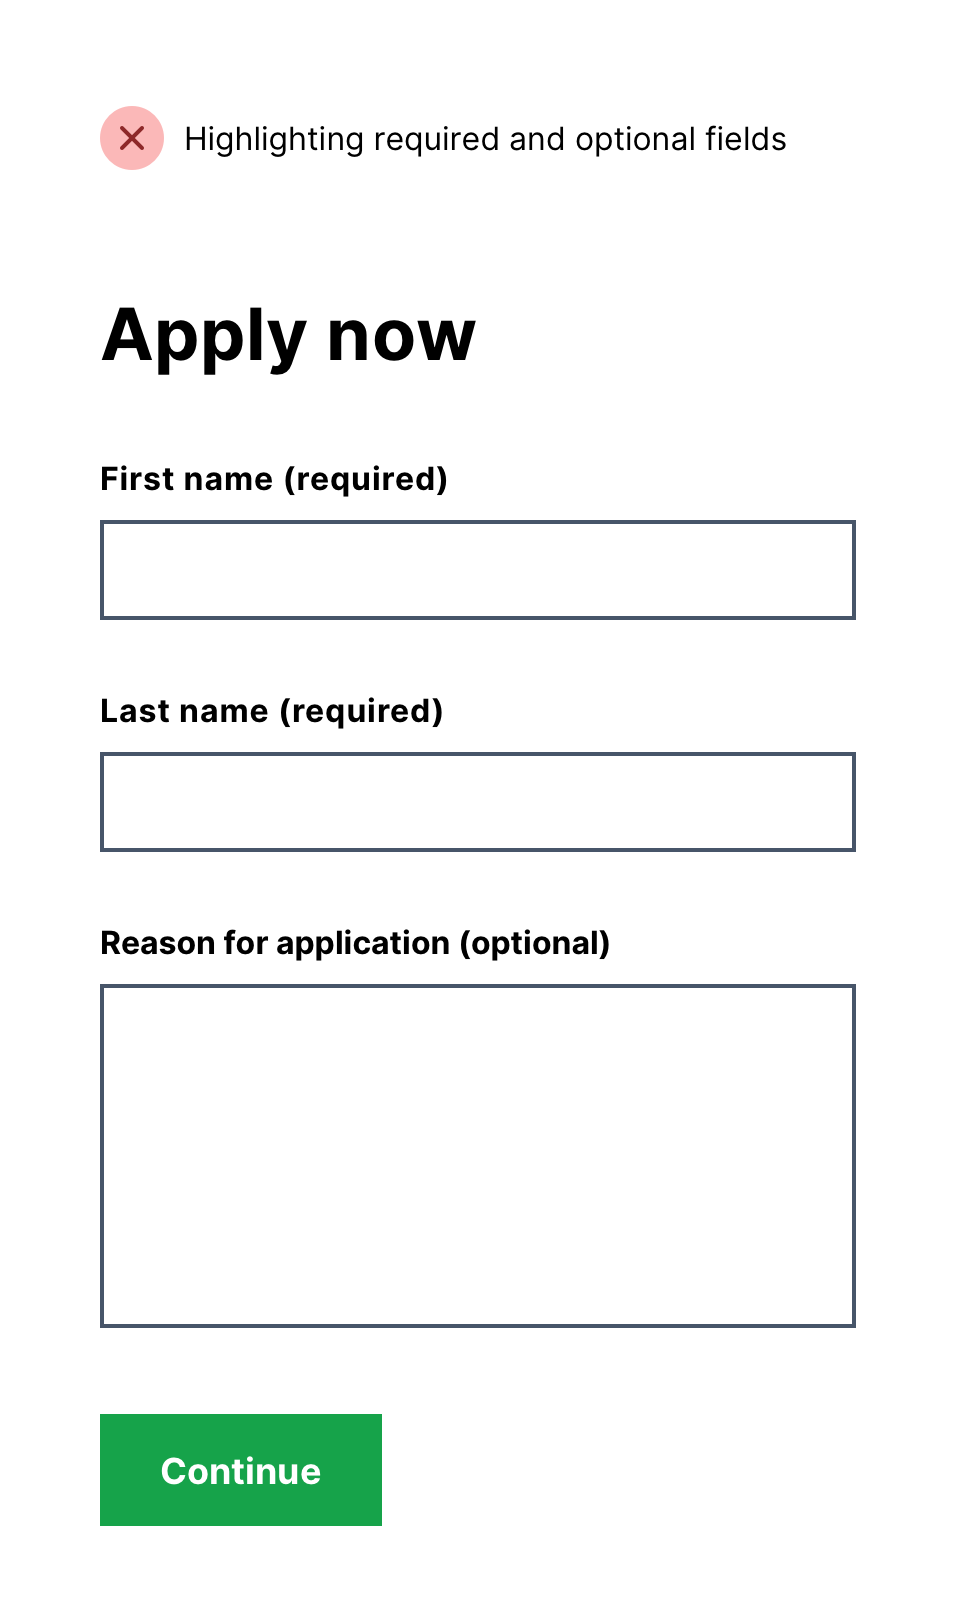 A form highlight both required and optional fields